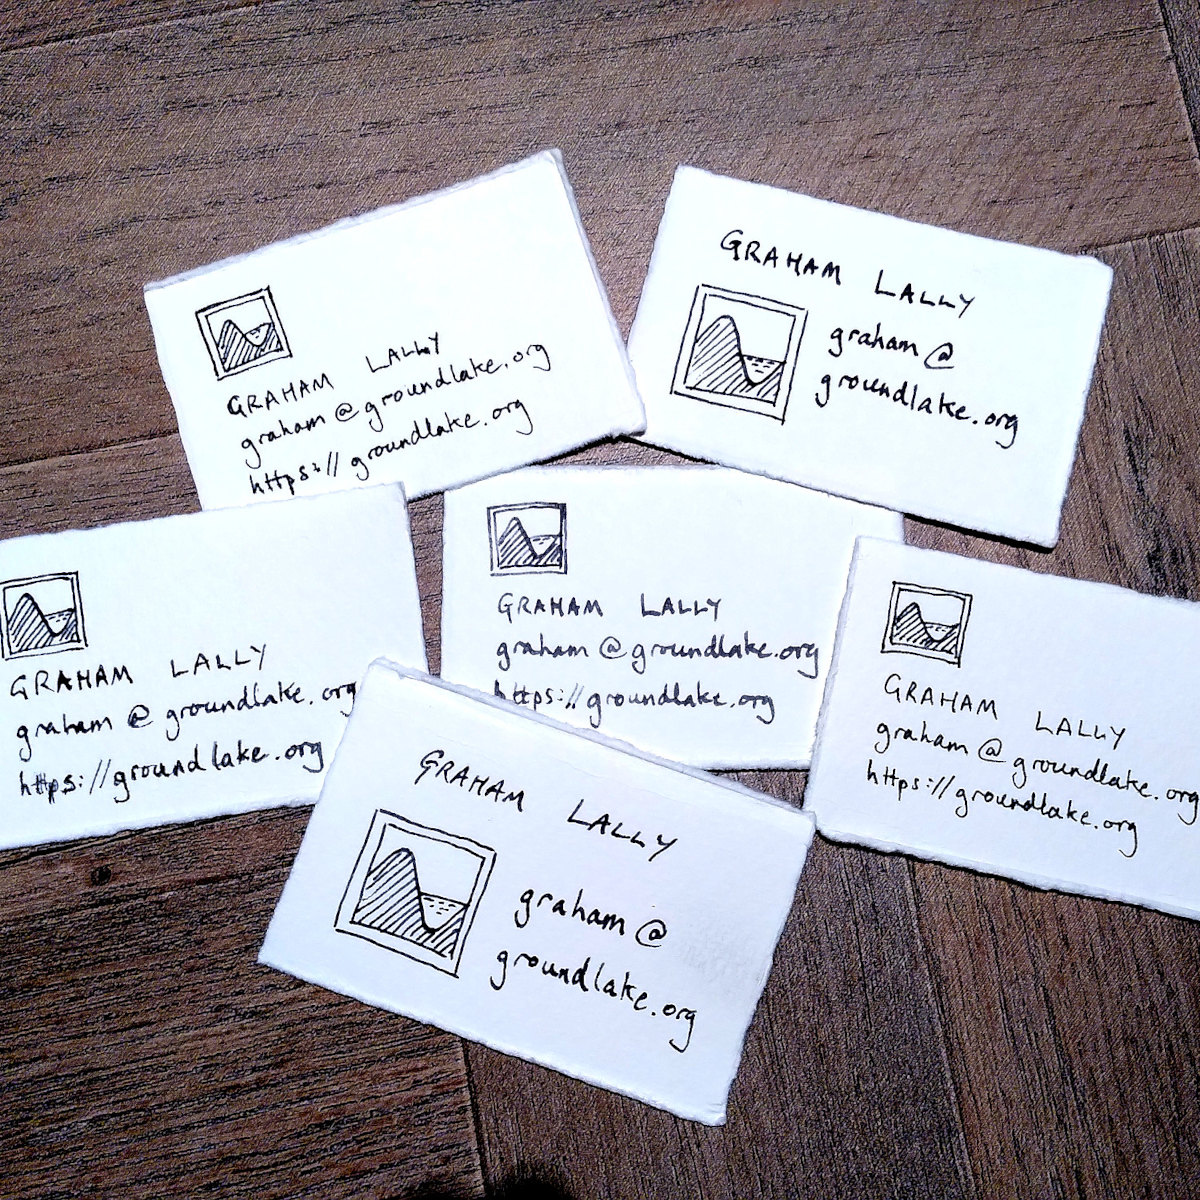 A small collection of handmade business cards, written with pen on torn out paper. Each card says 